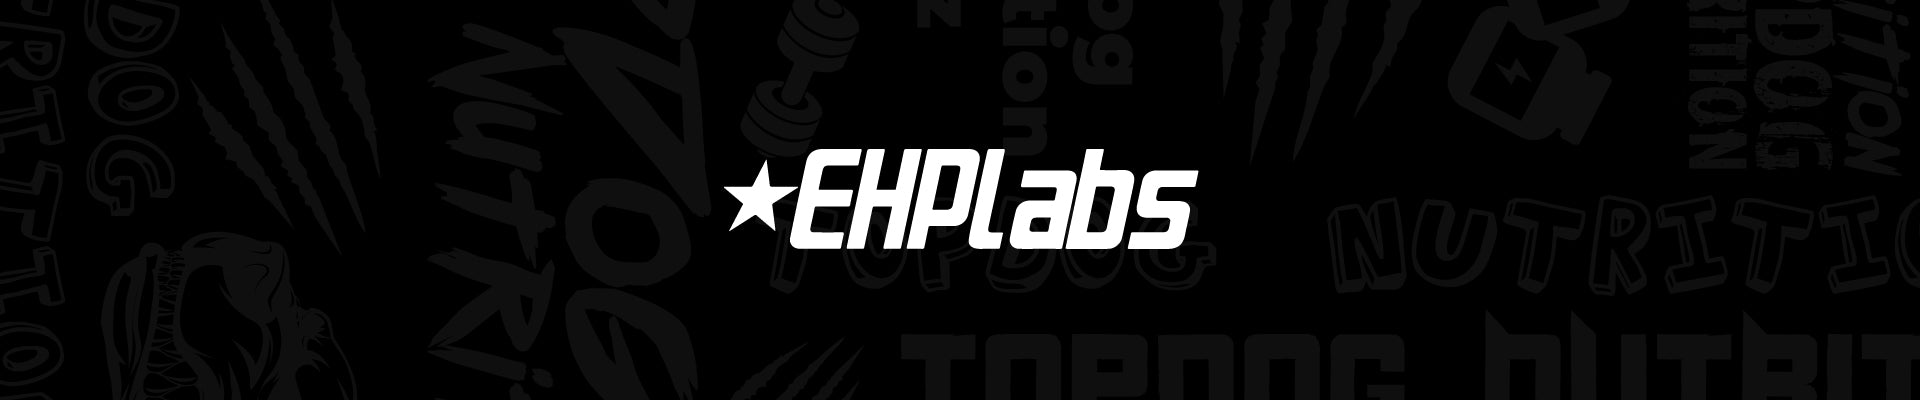 EHP Labs Proteins, OxyShred Pre Workouts